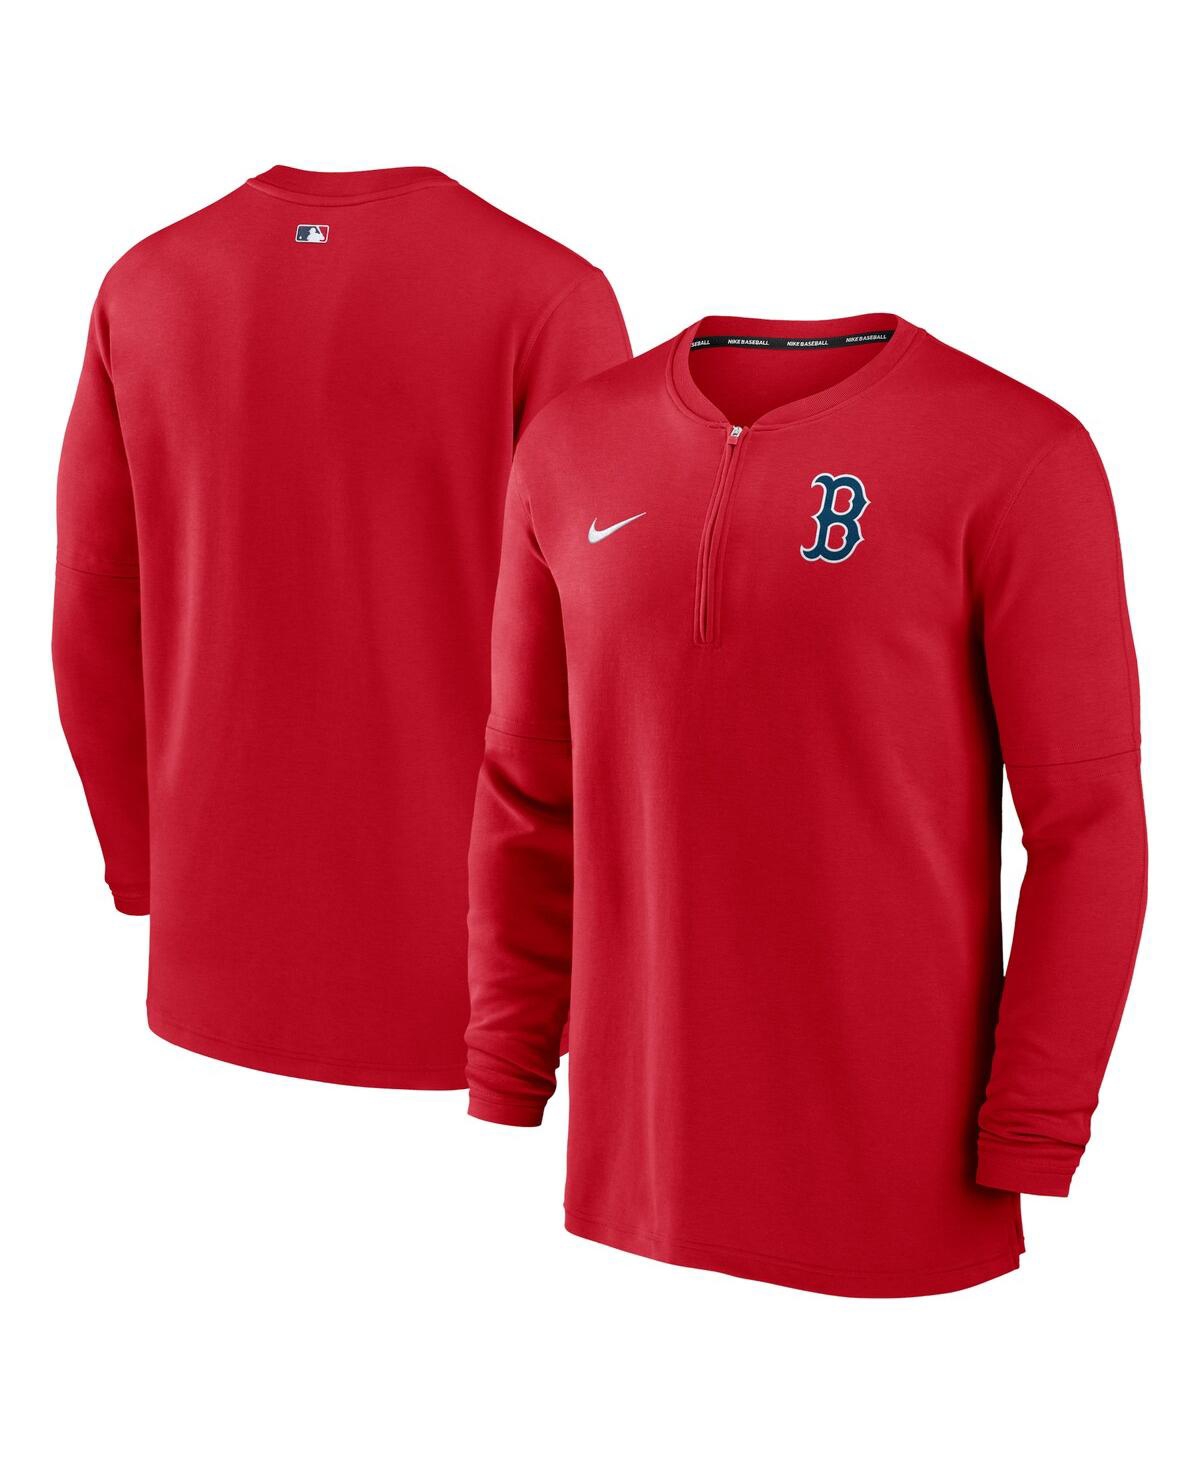 Nike Men's  Red Boston Red Sox Authentic Collection Game Time Performance Quarter-zip Top